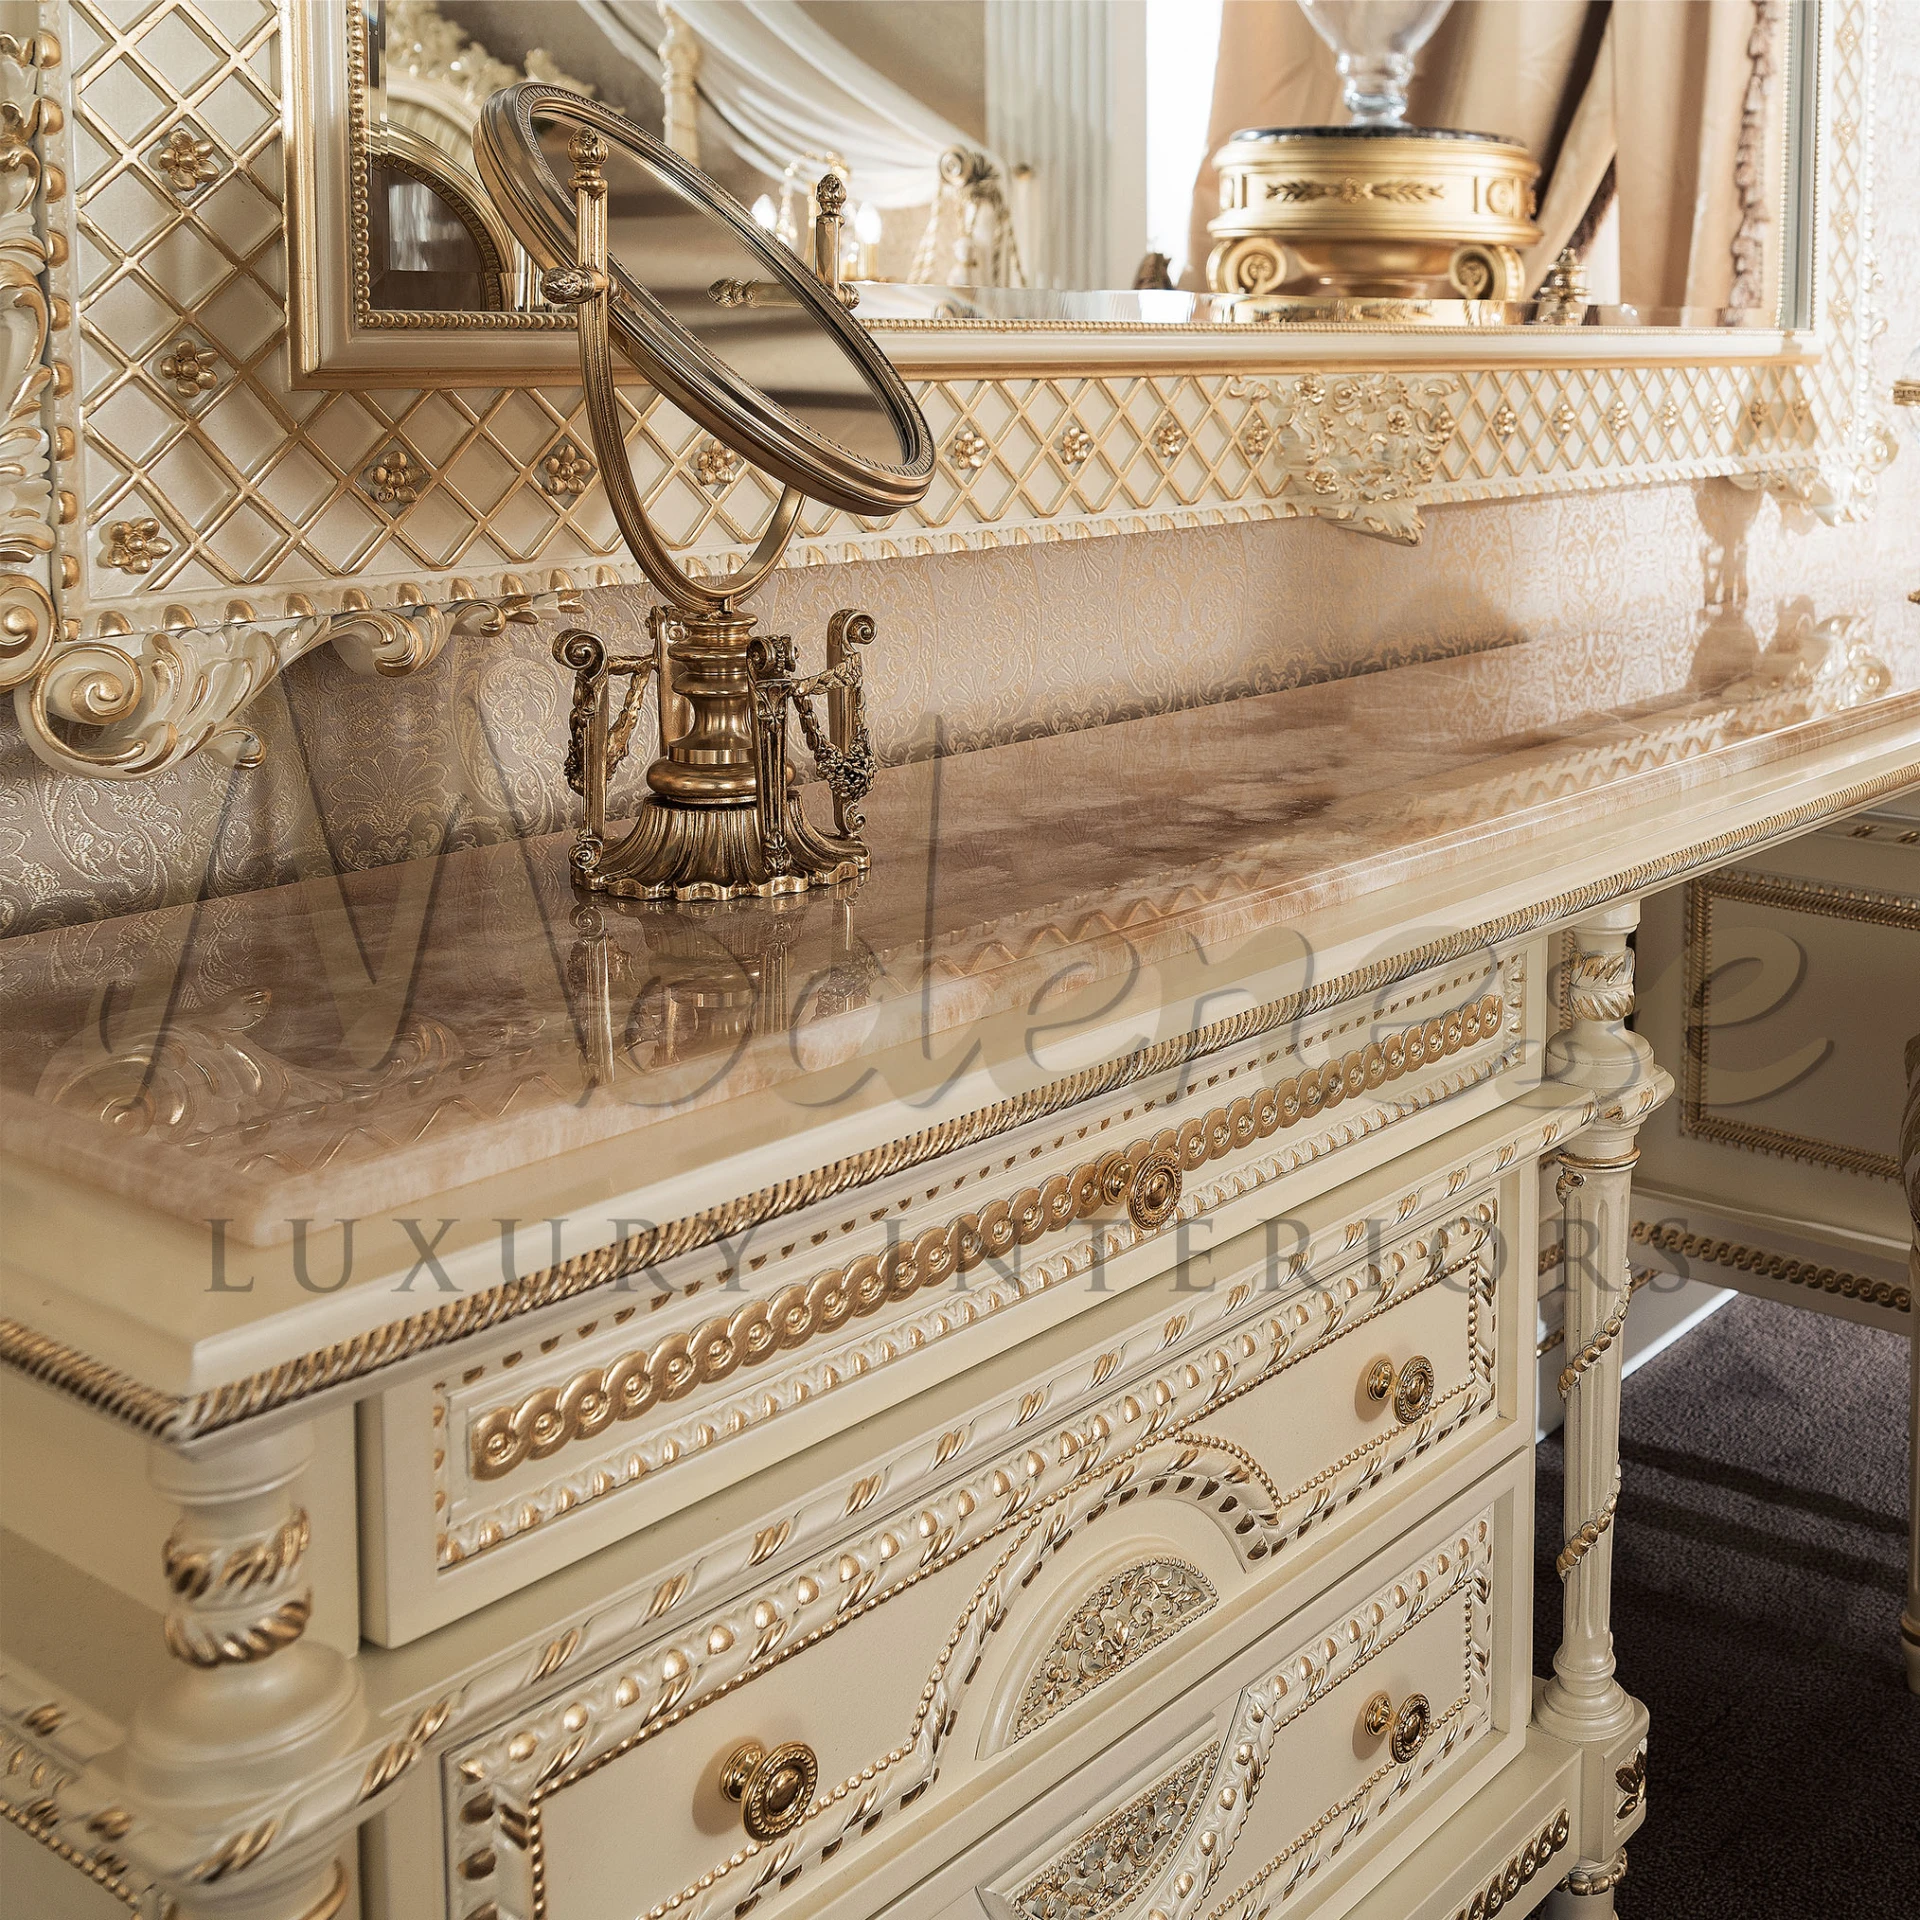 An elaborate, long dressing table with a luxurious onyx stone top and a cream-colored base featuring six drawers with intricate beading and ornate metal handles. 